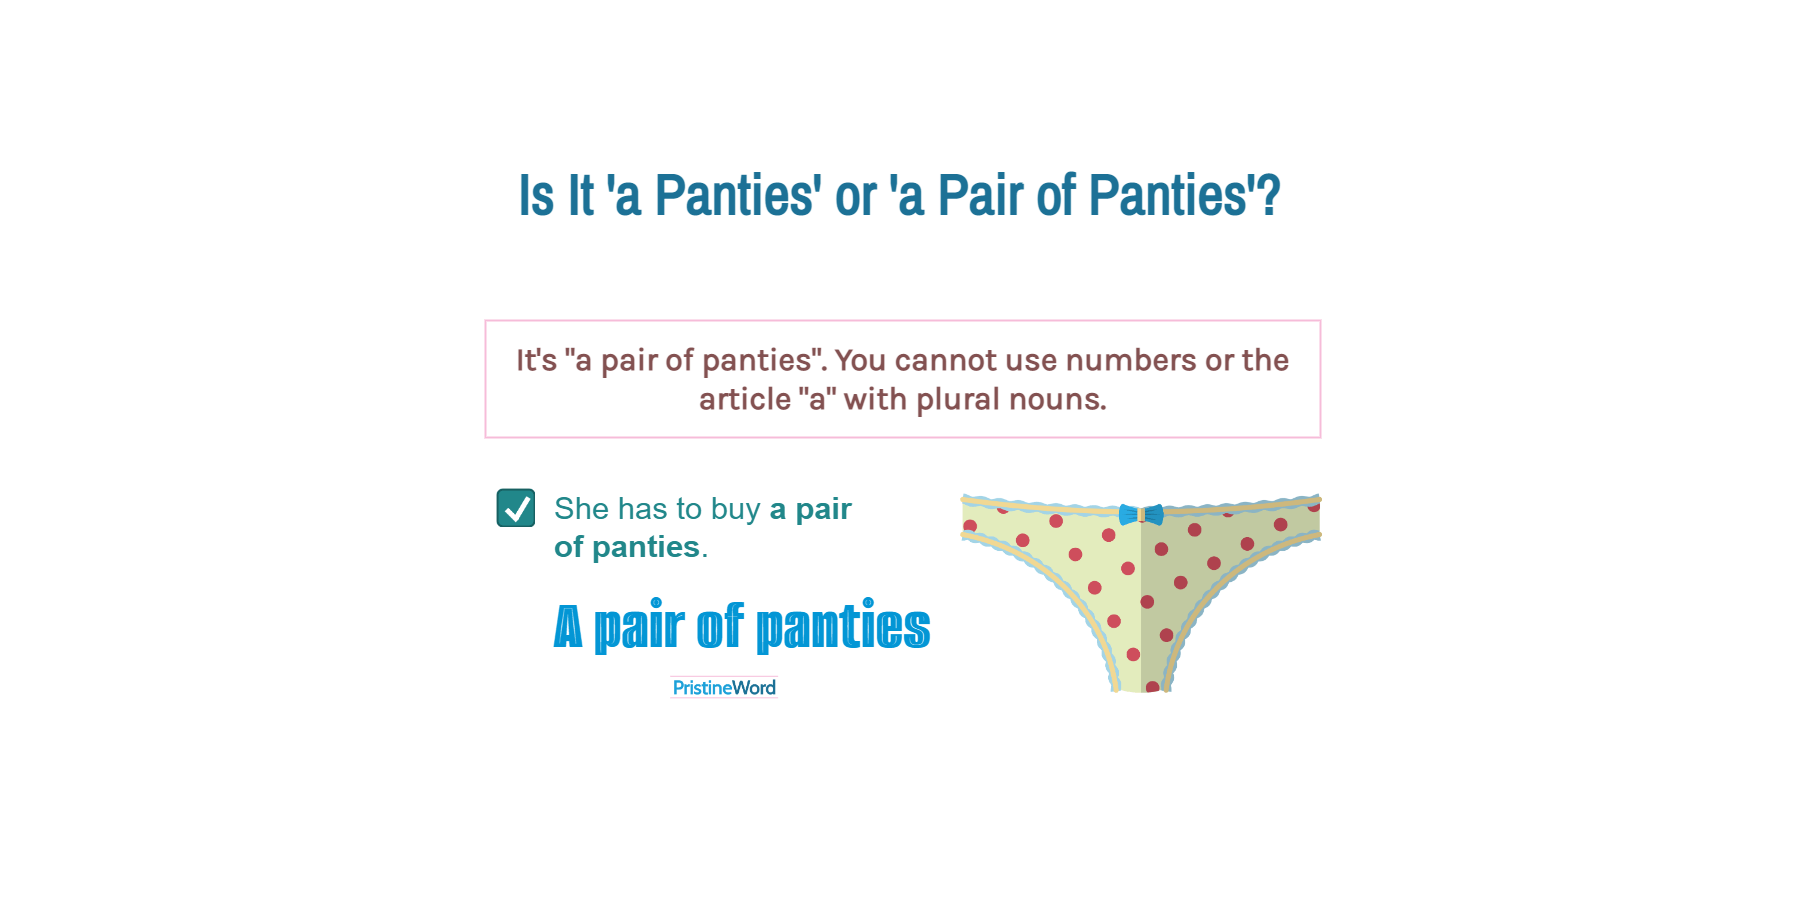 https://www.pristineword.com/content/images/size/w1200/2022/07/GRA217---A-PAIR-OF-PANTIES.png